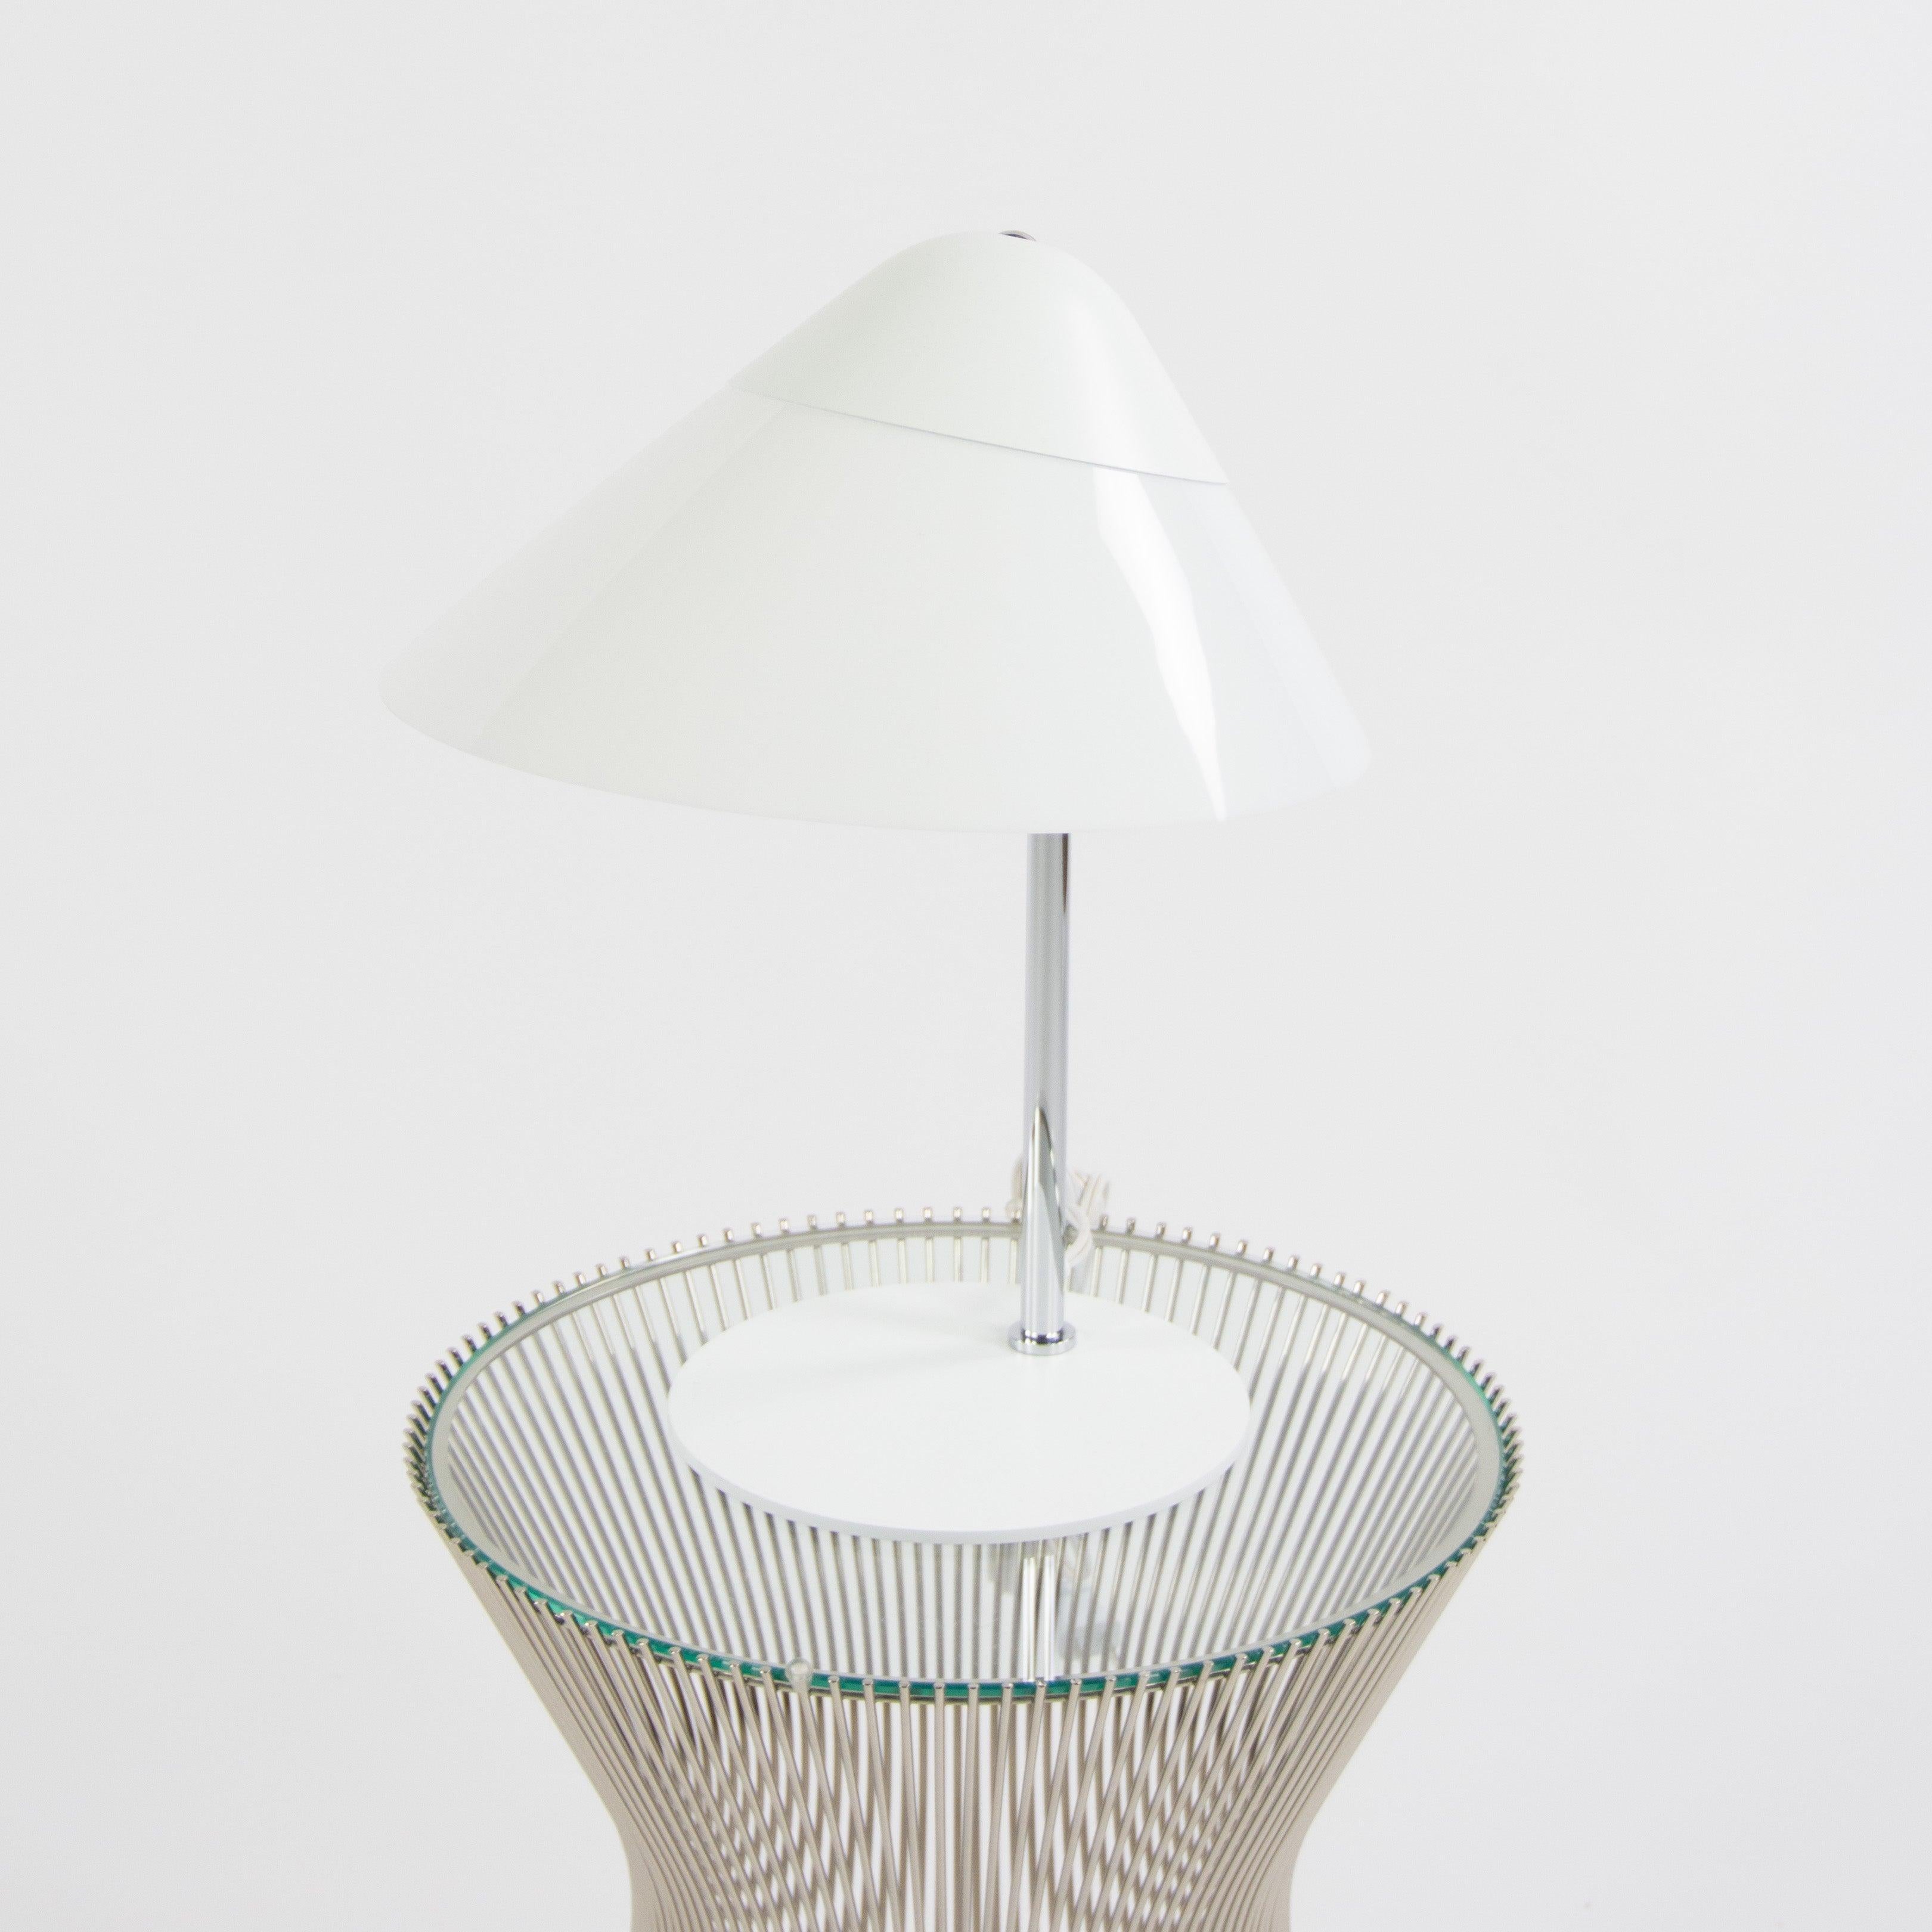 Listed for sale is a showroom model, new, open box Pandul Opala B01 Mini Table Lamp, designed by Hans Wegner.

This example was purchased from a Pandul rep, who had a number of other fabulous pieces.

The table was a showroom model from my